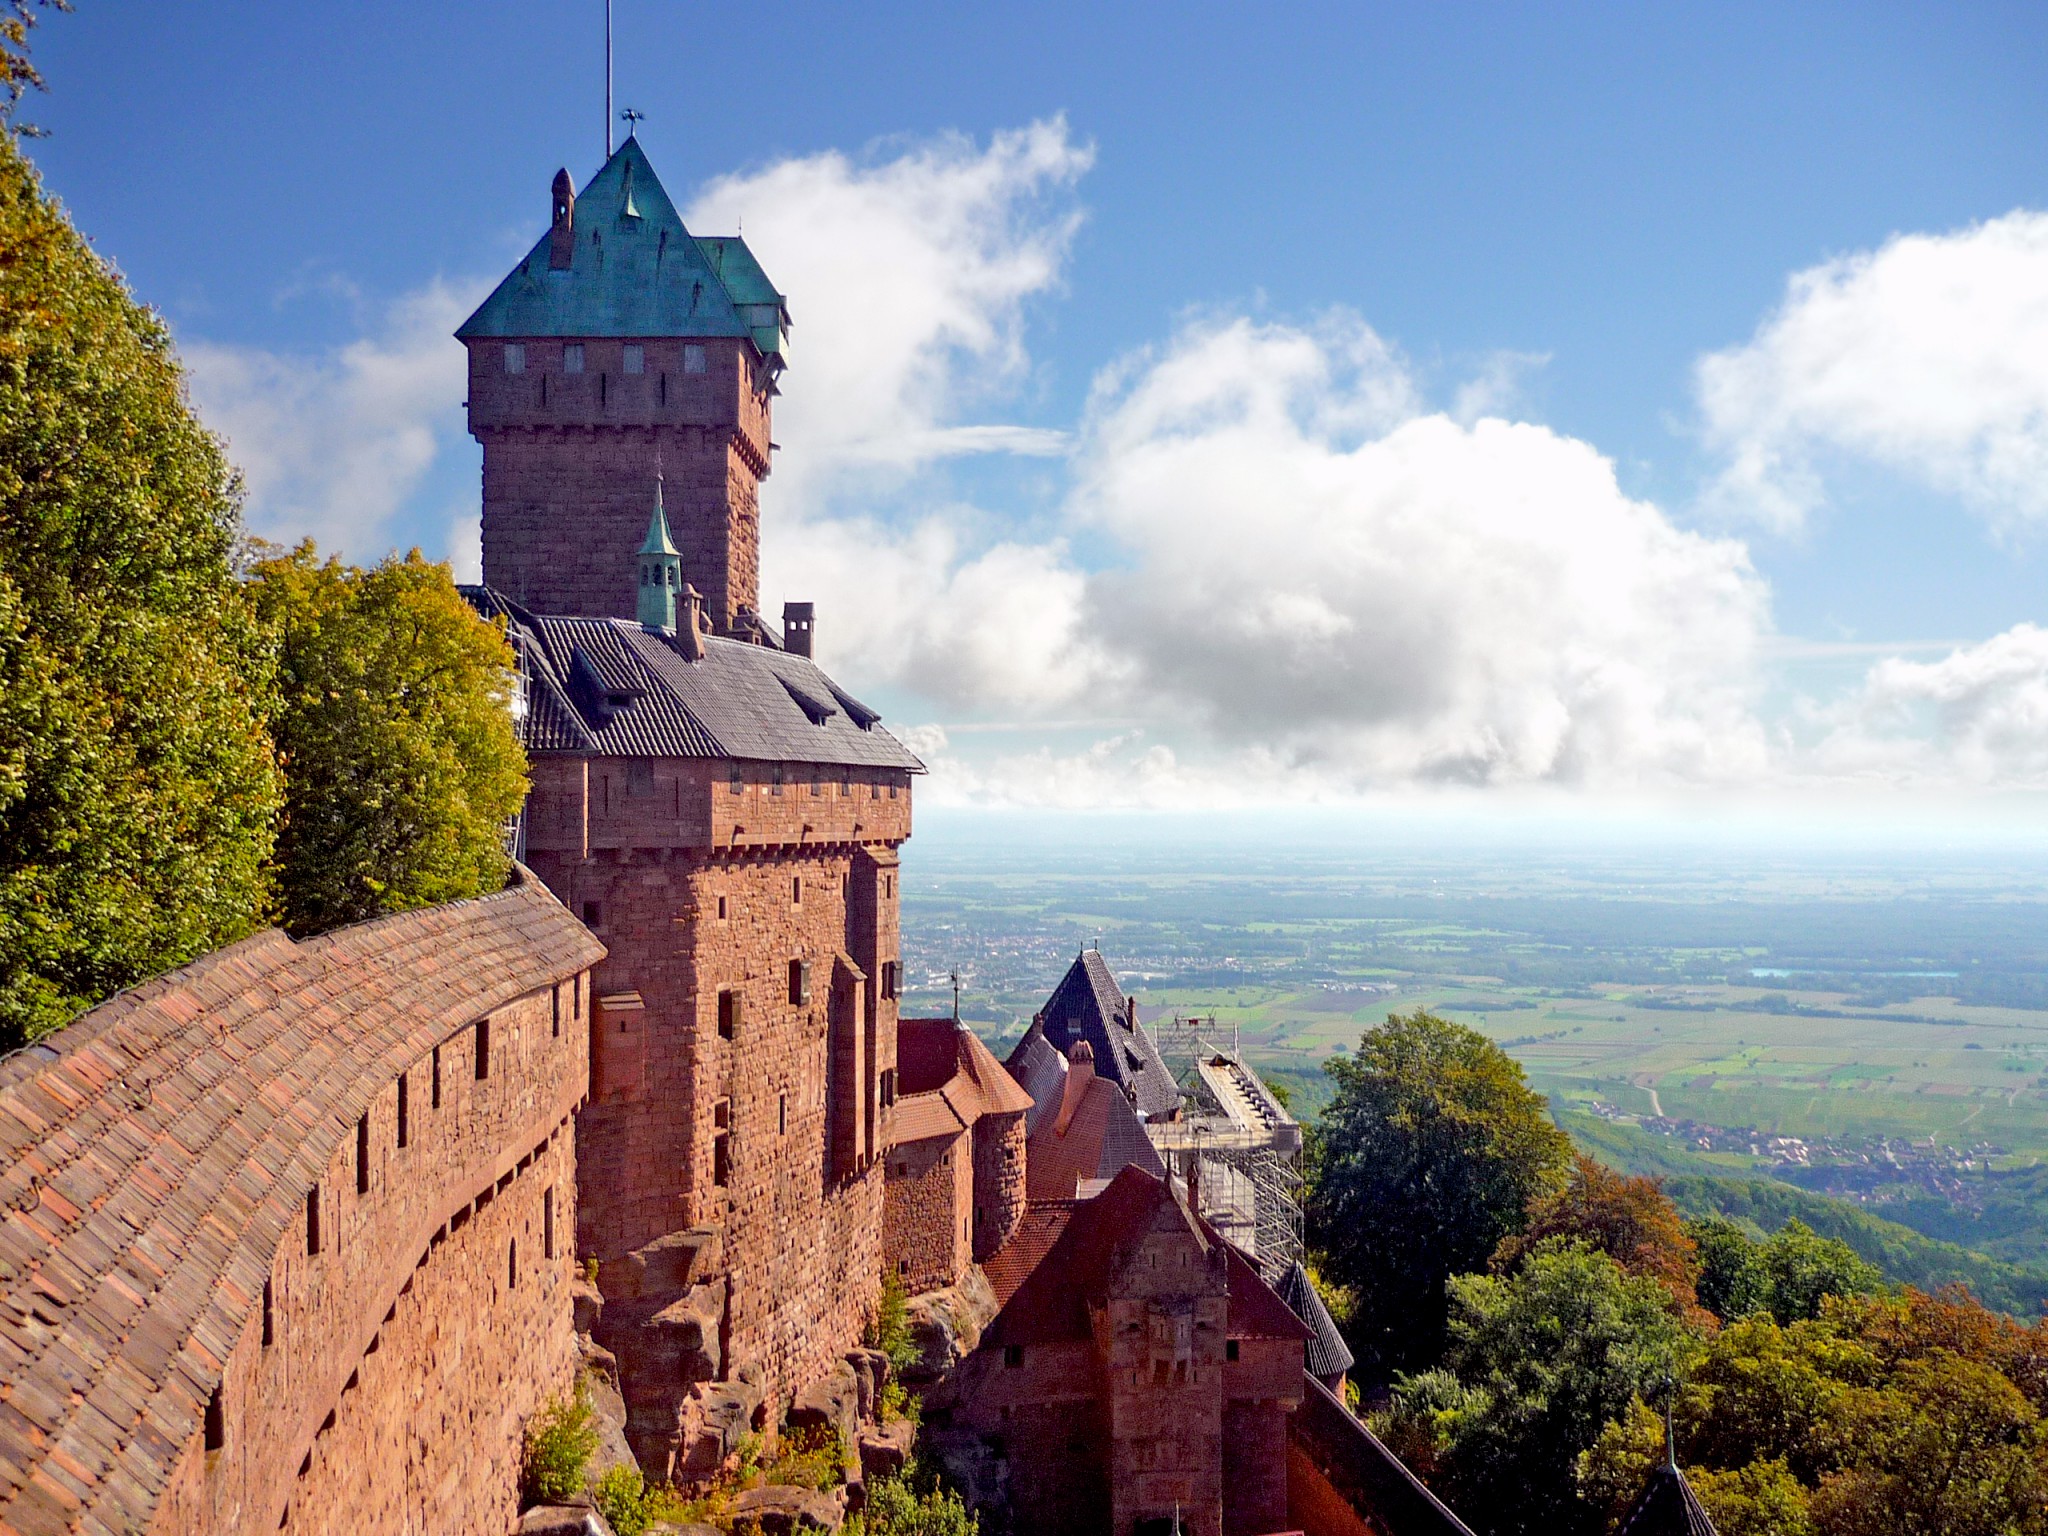 The castle of Haut-Kœnigsbourg overlooking the Plain of Alsace © French Moments